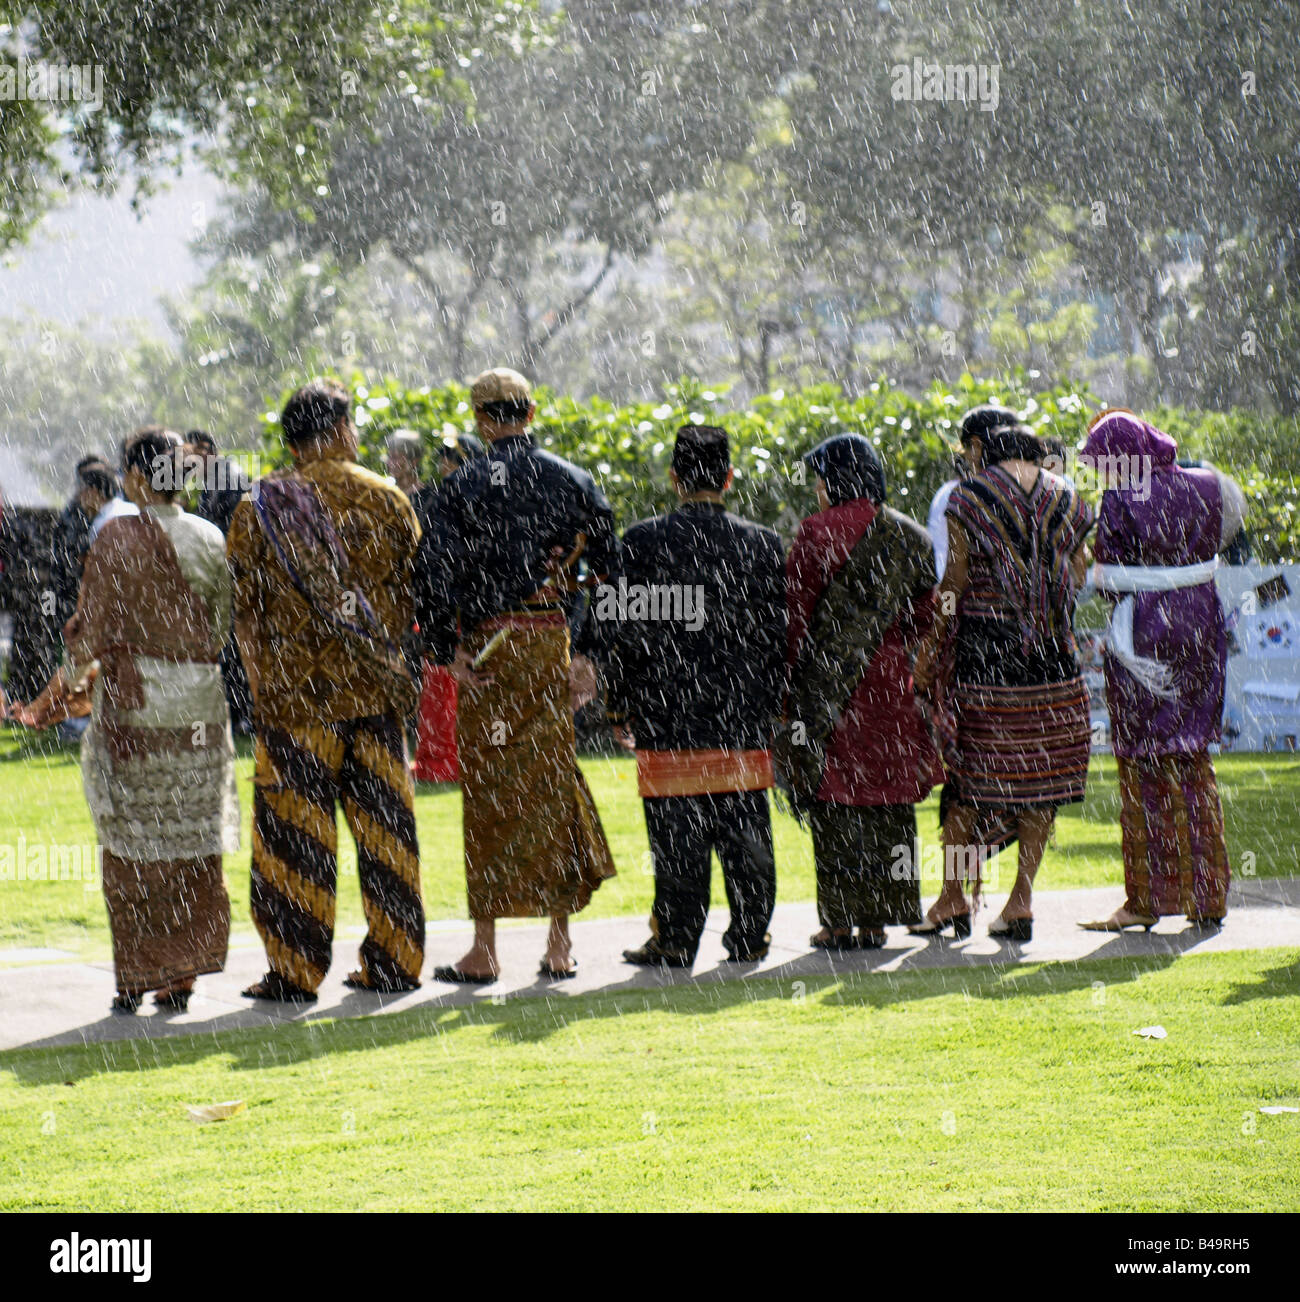 People dressed in national costumes Stock Photo